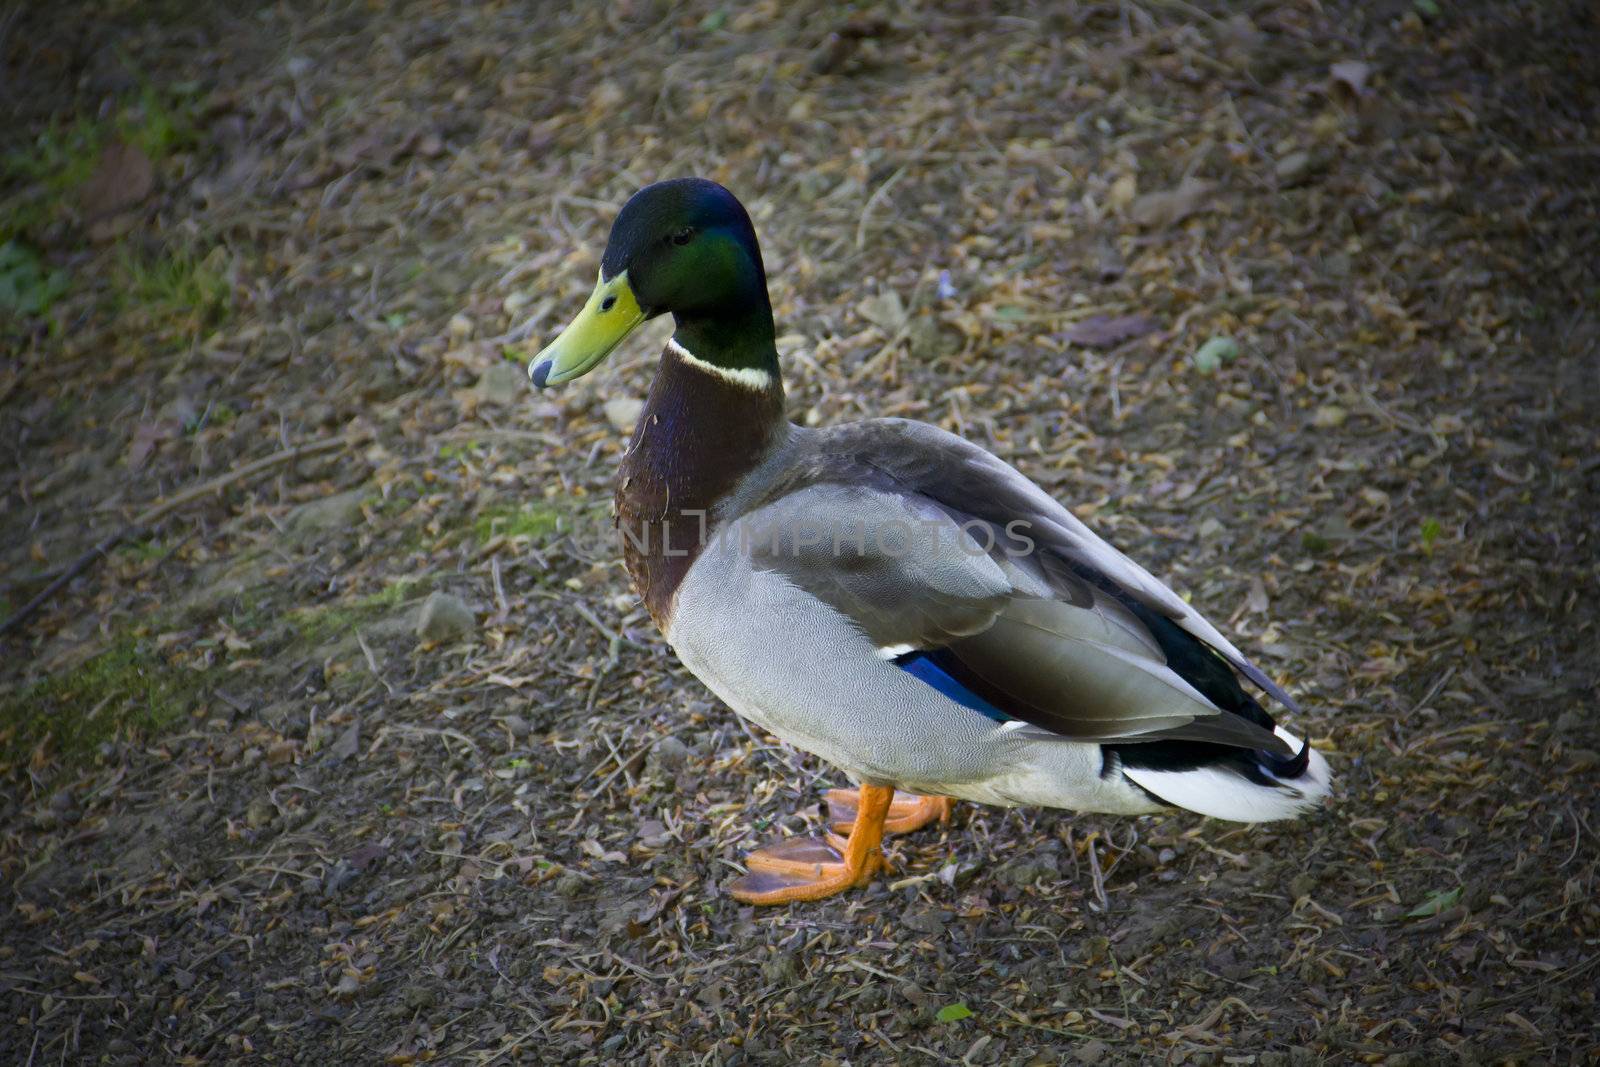 A fine example of the lovely multicoloured male mallard